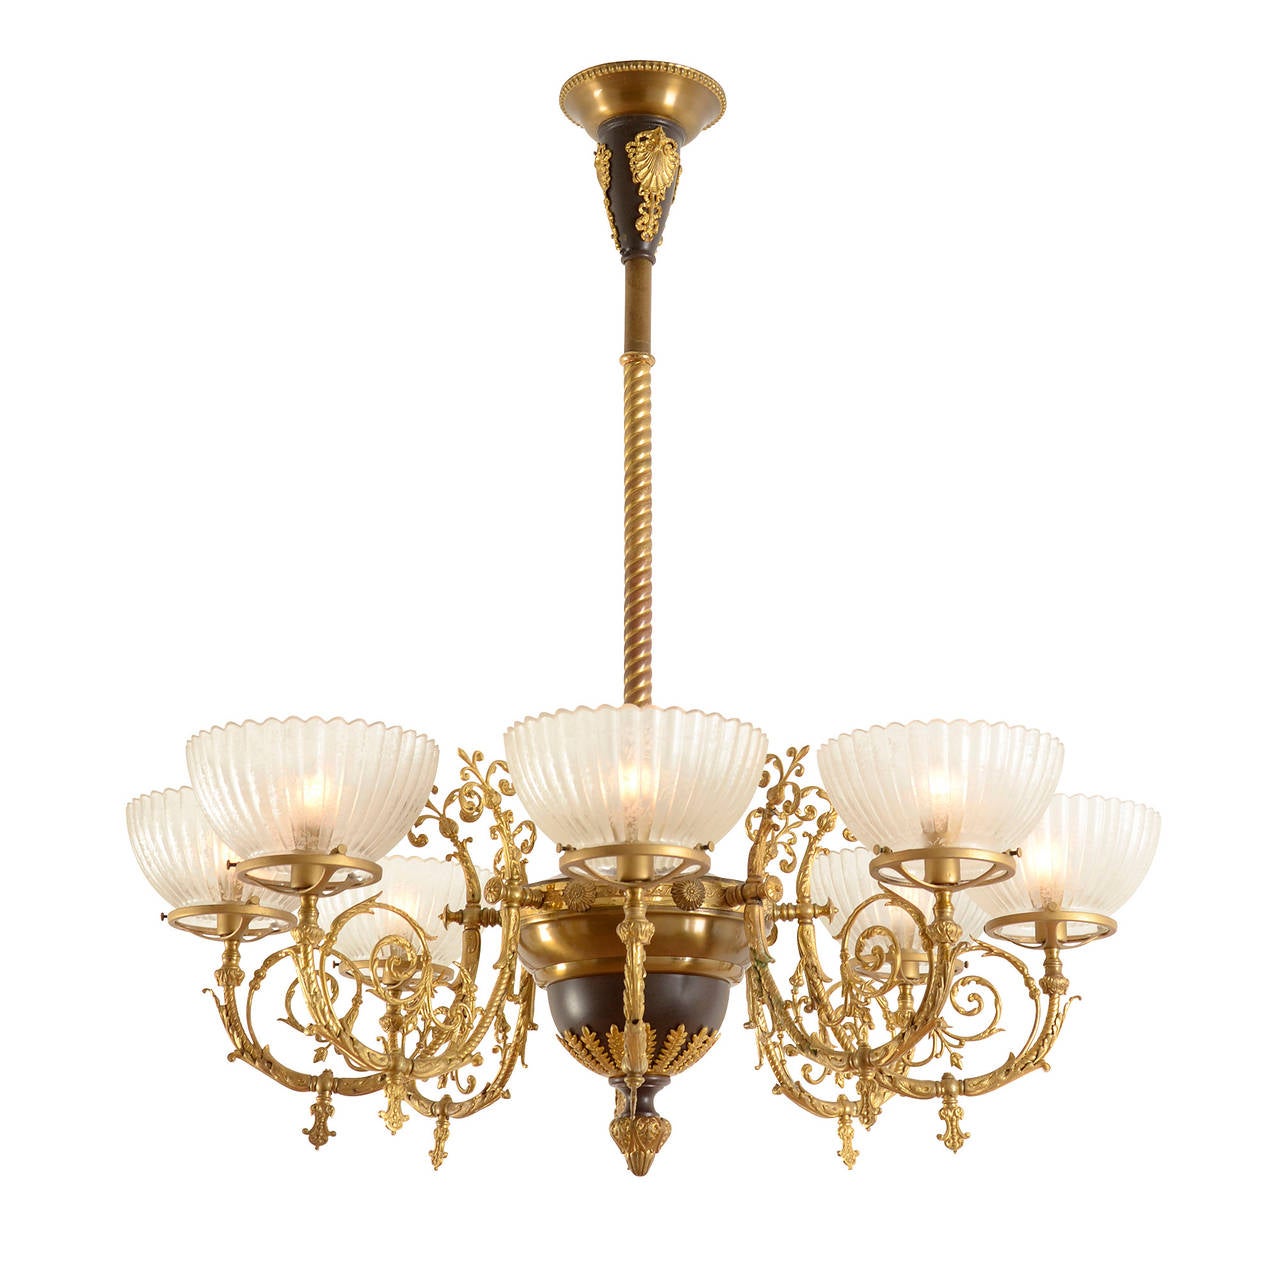 Distinguished by stylized acanthus leaves, exhuberant ornamentation and finely detailed castings, Beaux Arts-style lighting like this lovely 8-light  example captivated the market during the 1890s. Difficult and expensive to produce, they are hard